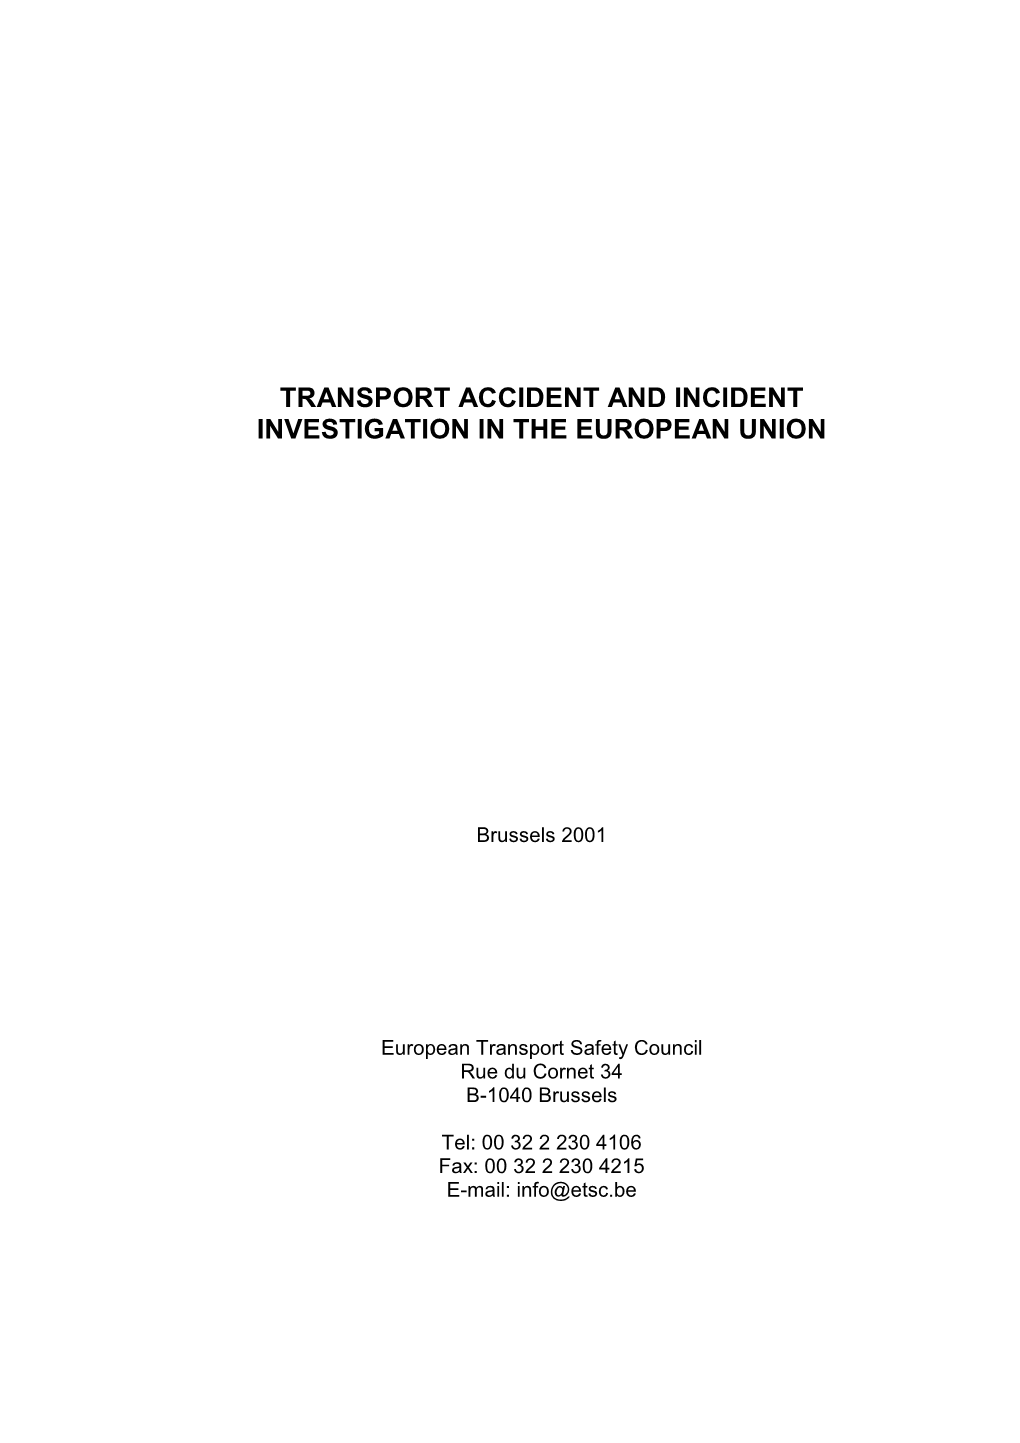 Transport Accident Investigation Bodies Should Be Totally Independent of the Regulatory Body, Judiciary and Operational Regime